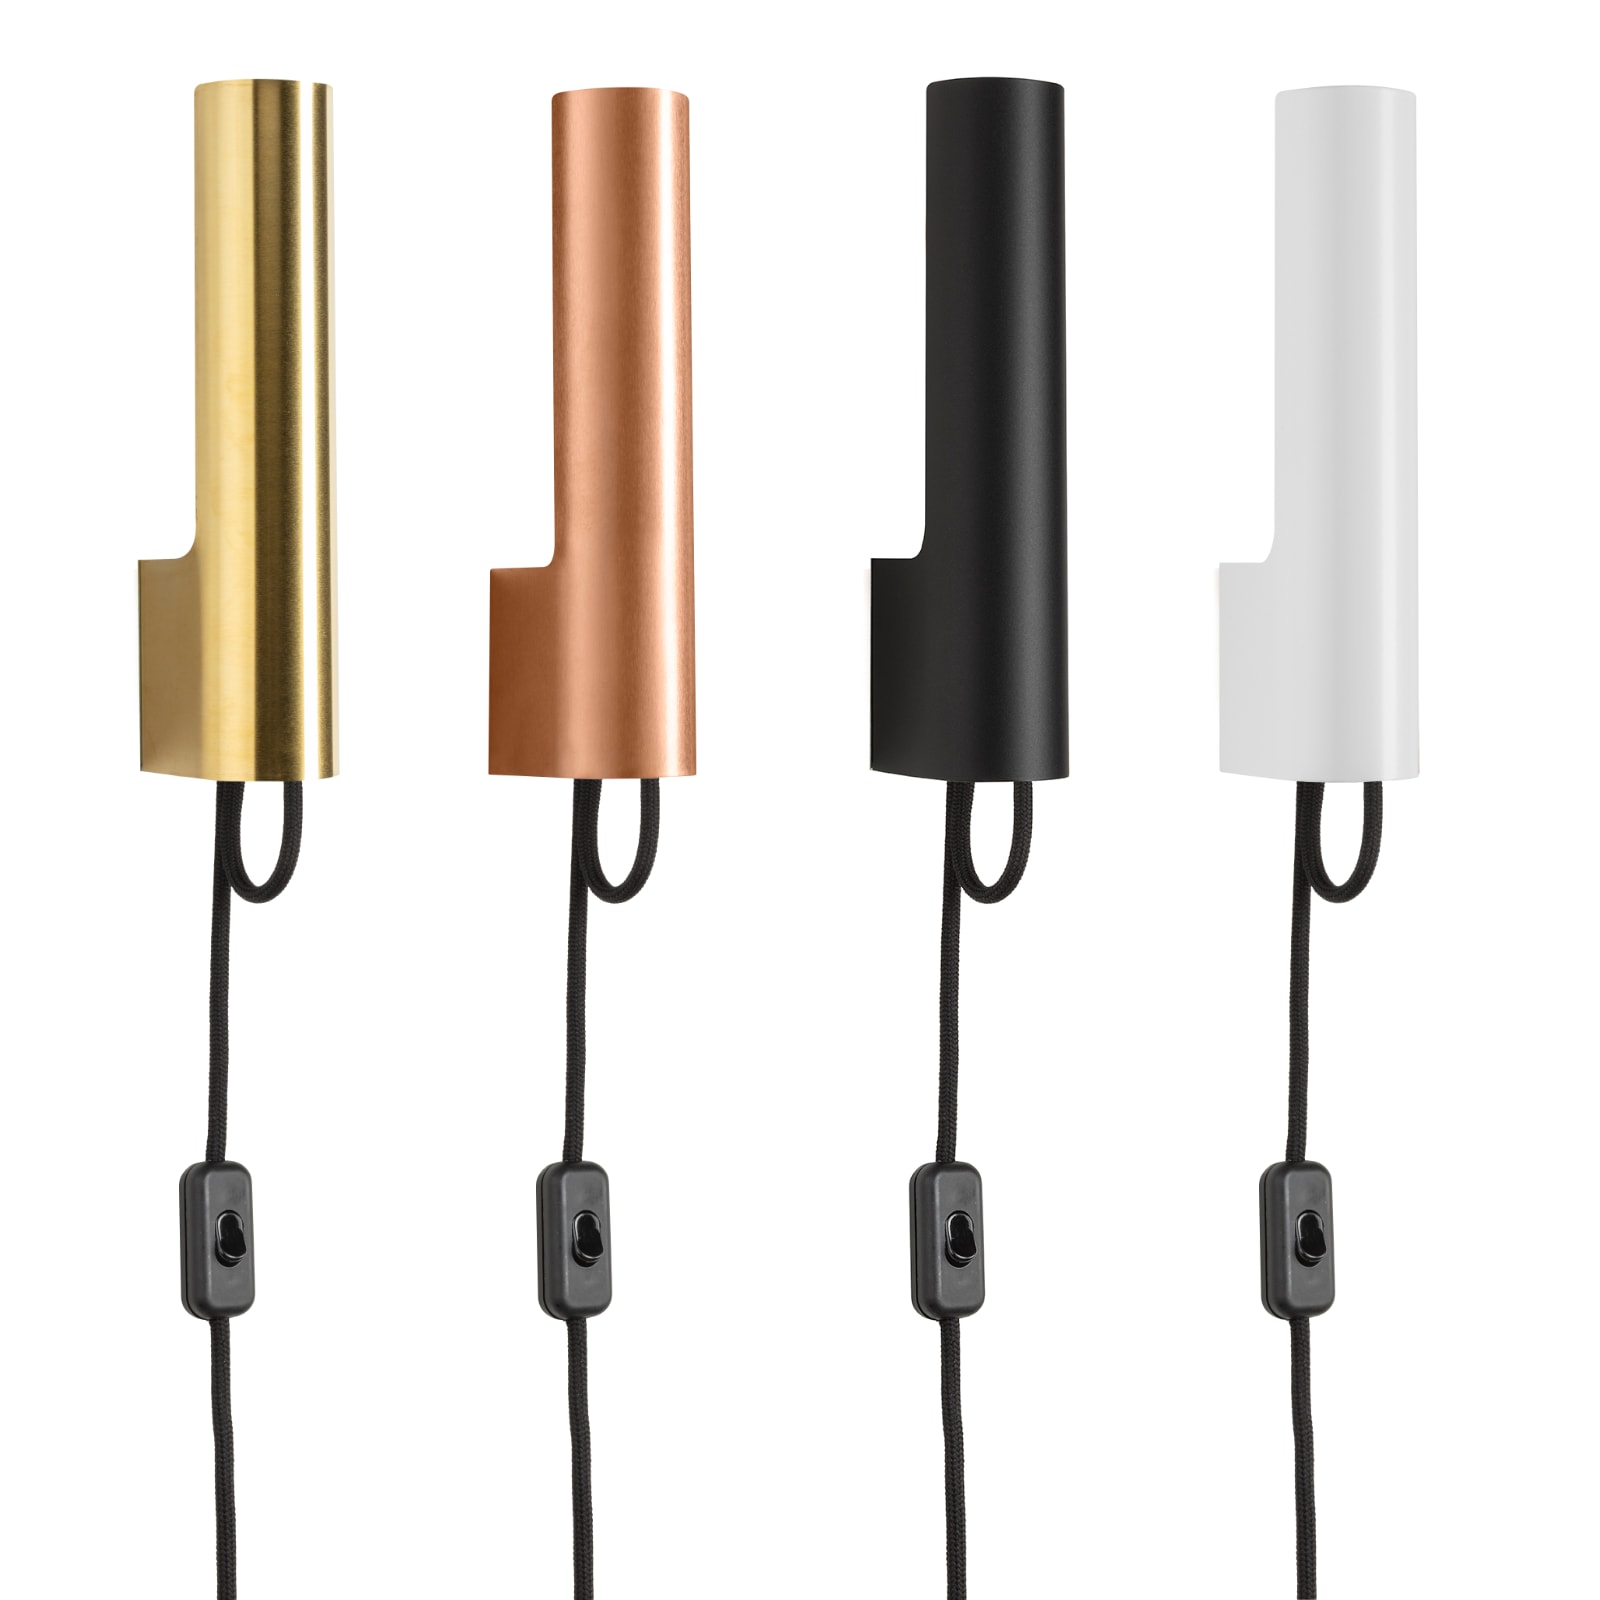 Slim Wall Sconce VISIR Made from Copper or Brass: Models with plug and cable